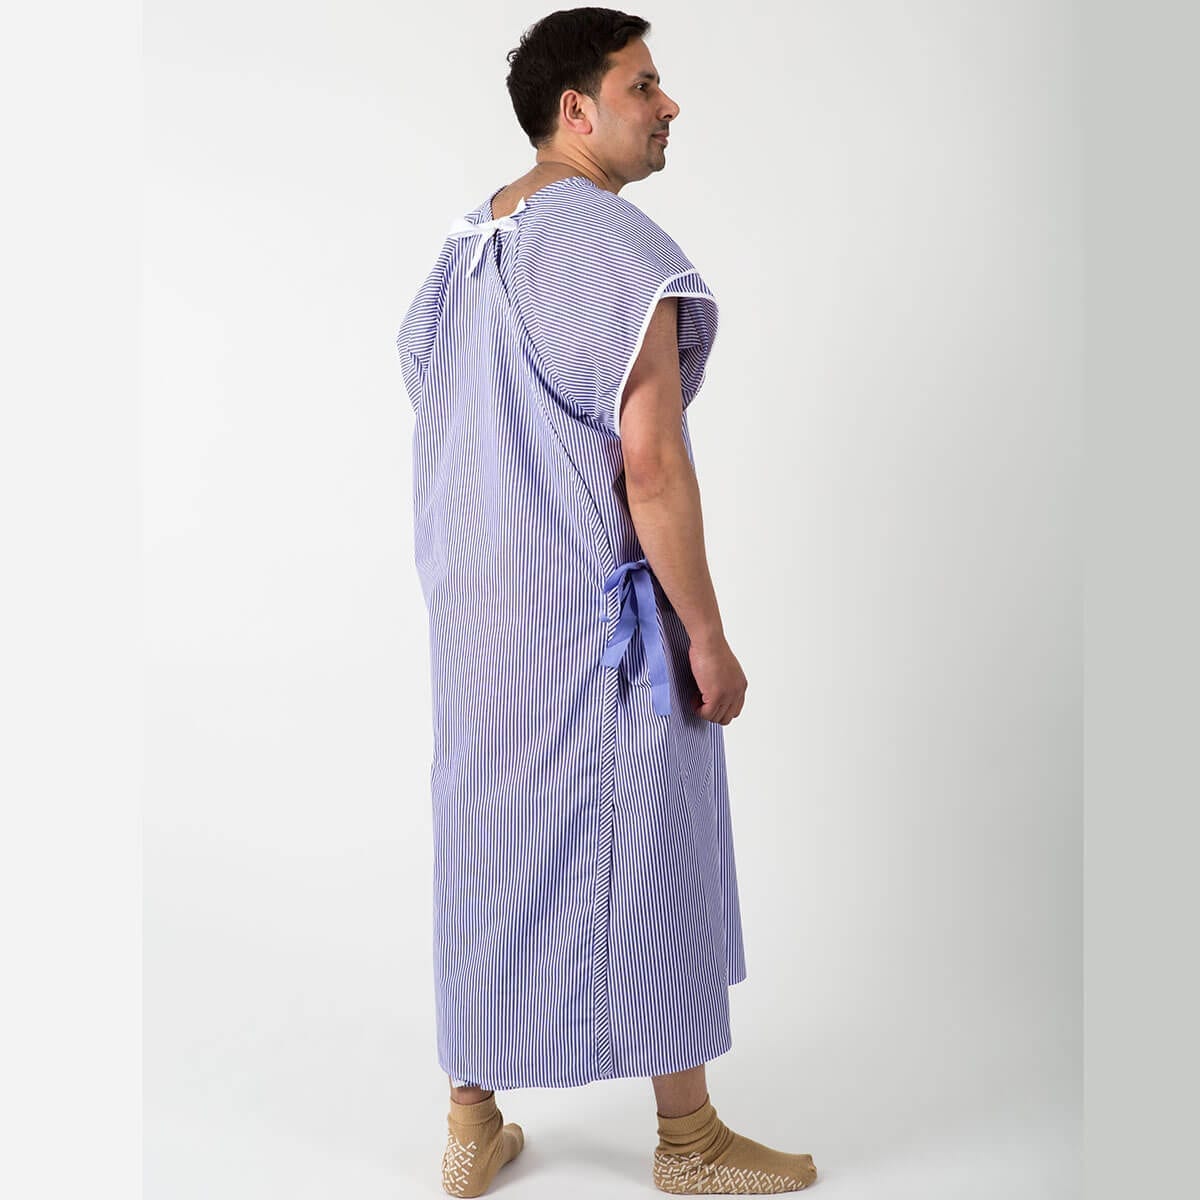 Hospital dignity gown - rear view